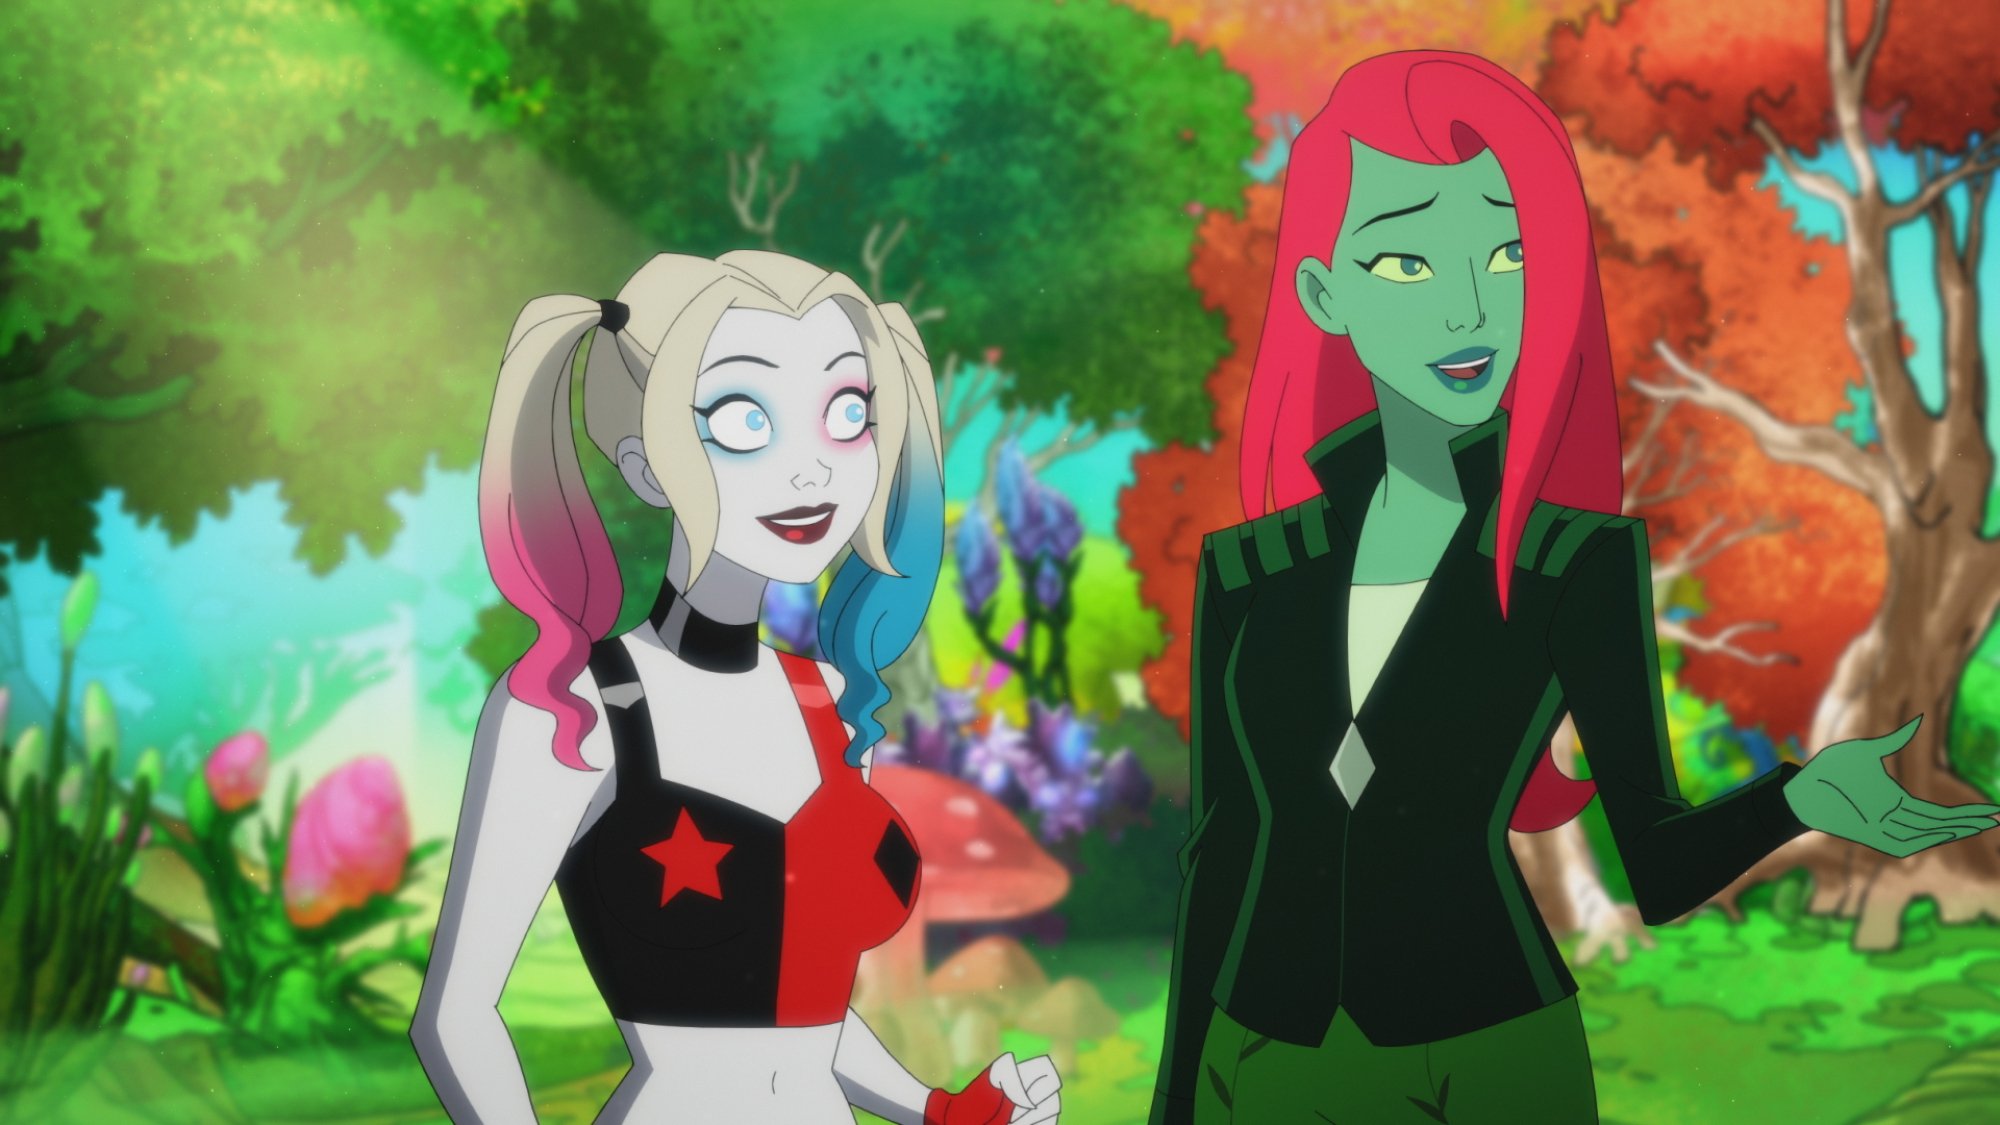 Harley Quinn and Poison Ivy in "Harley Quinn."